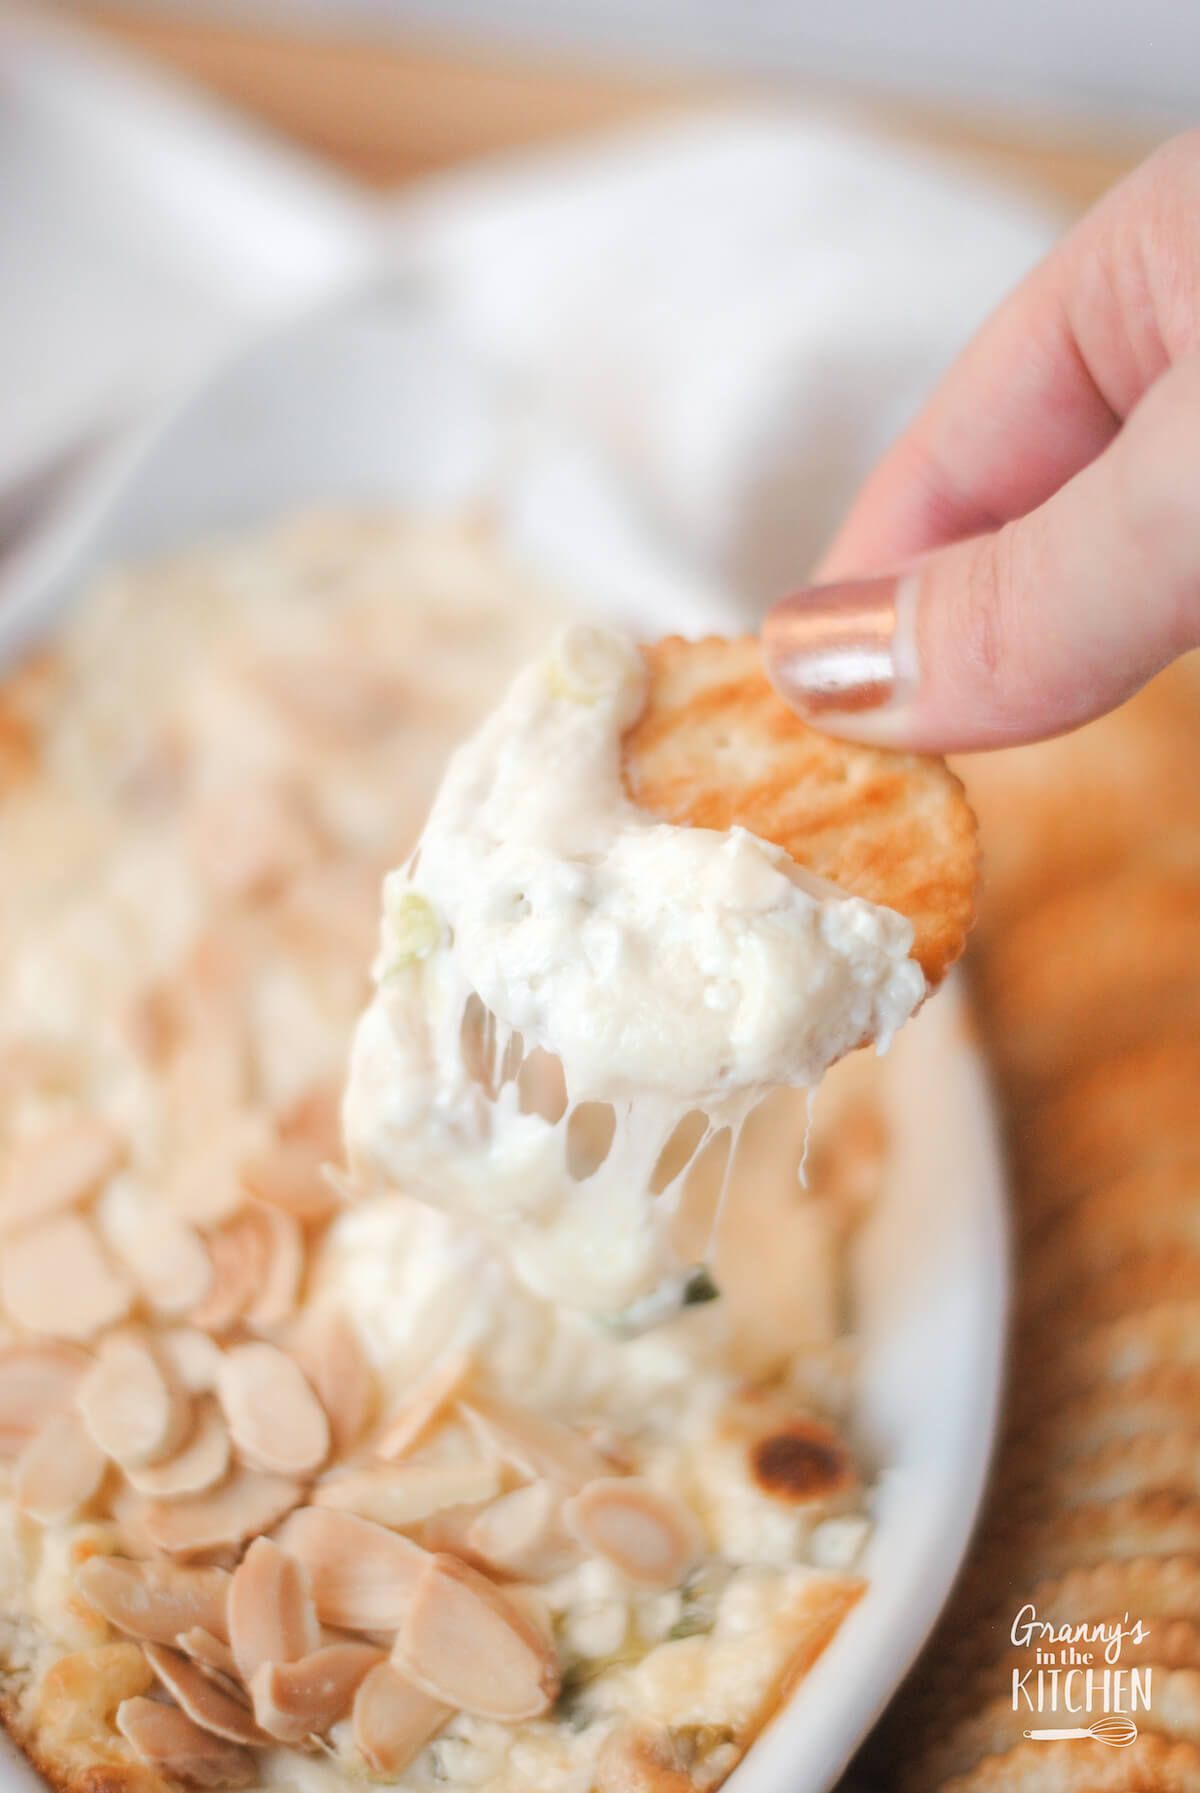 dipping a Ritz cracker into melted Swiss cheese dip.